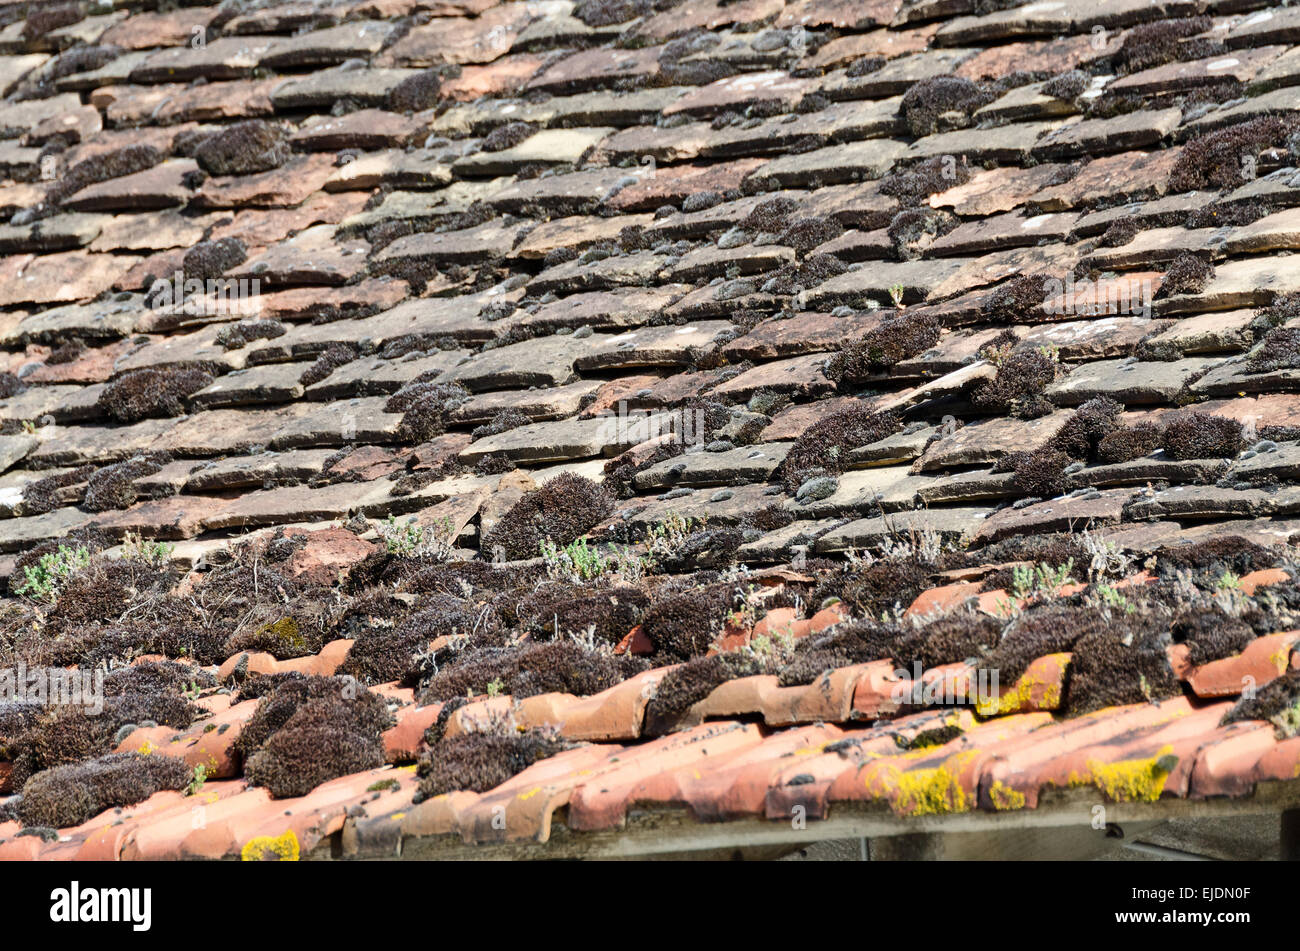 Thyme, sedums, mosses, and lichens growing on an old tile roof in Gigny-sur-Saone,  Burgundy, France. Stock Photo